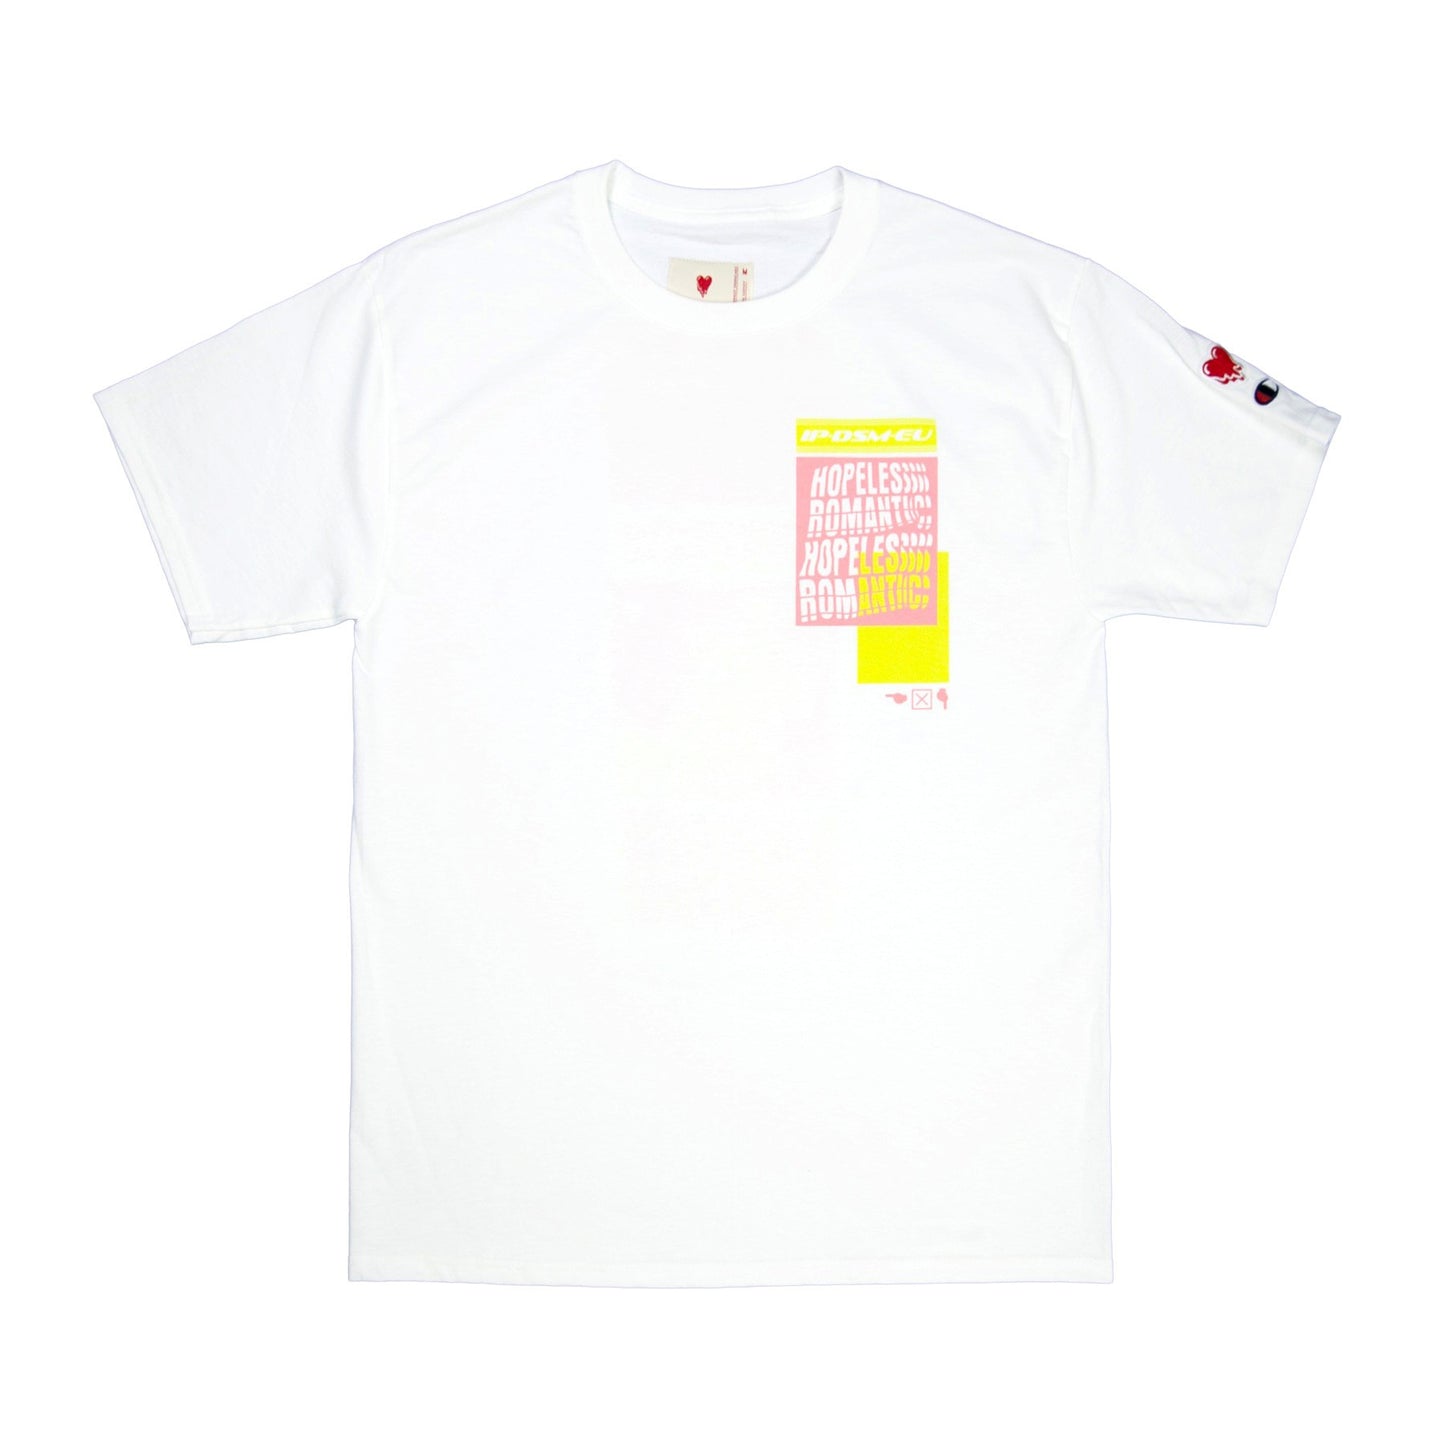 IP x EMOTIONALLY UNAVAILABLE x DOVER STREET MARKET SINGAPORE EXCLUSIVE - WHITE